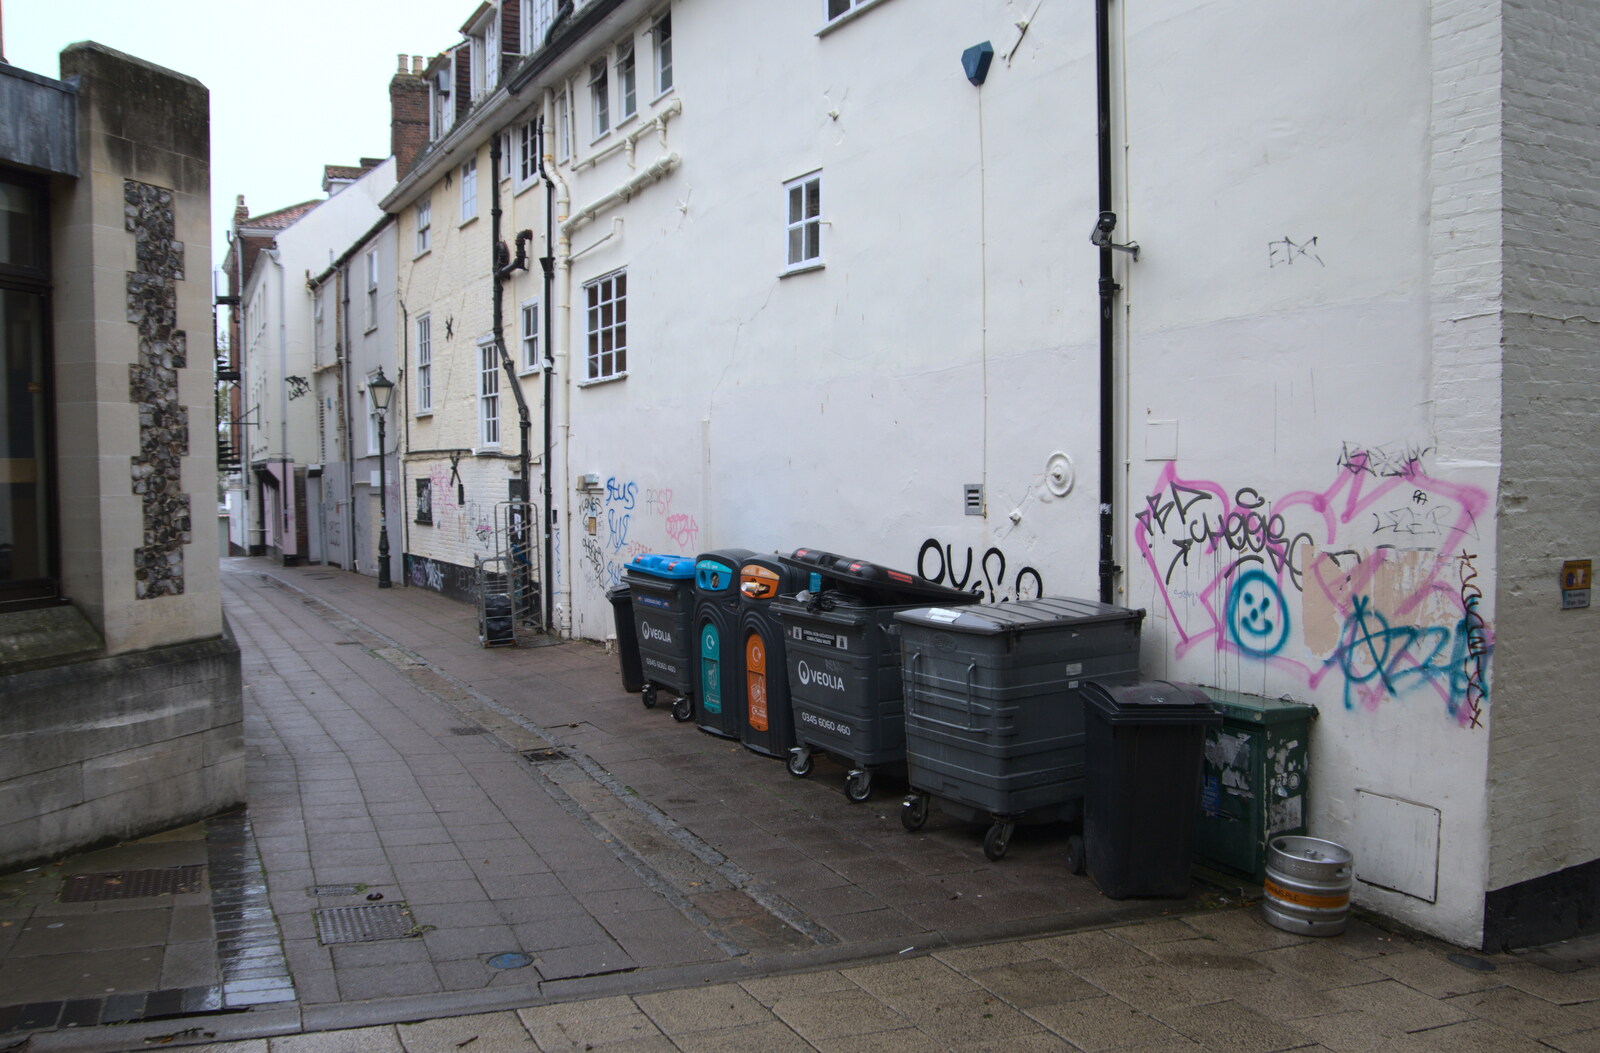 Graffiti Alley by Haymarket from A Trip to Norwich, Norfolk - 27th September 2020